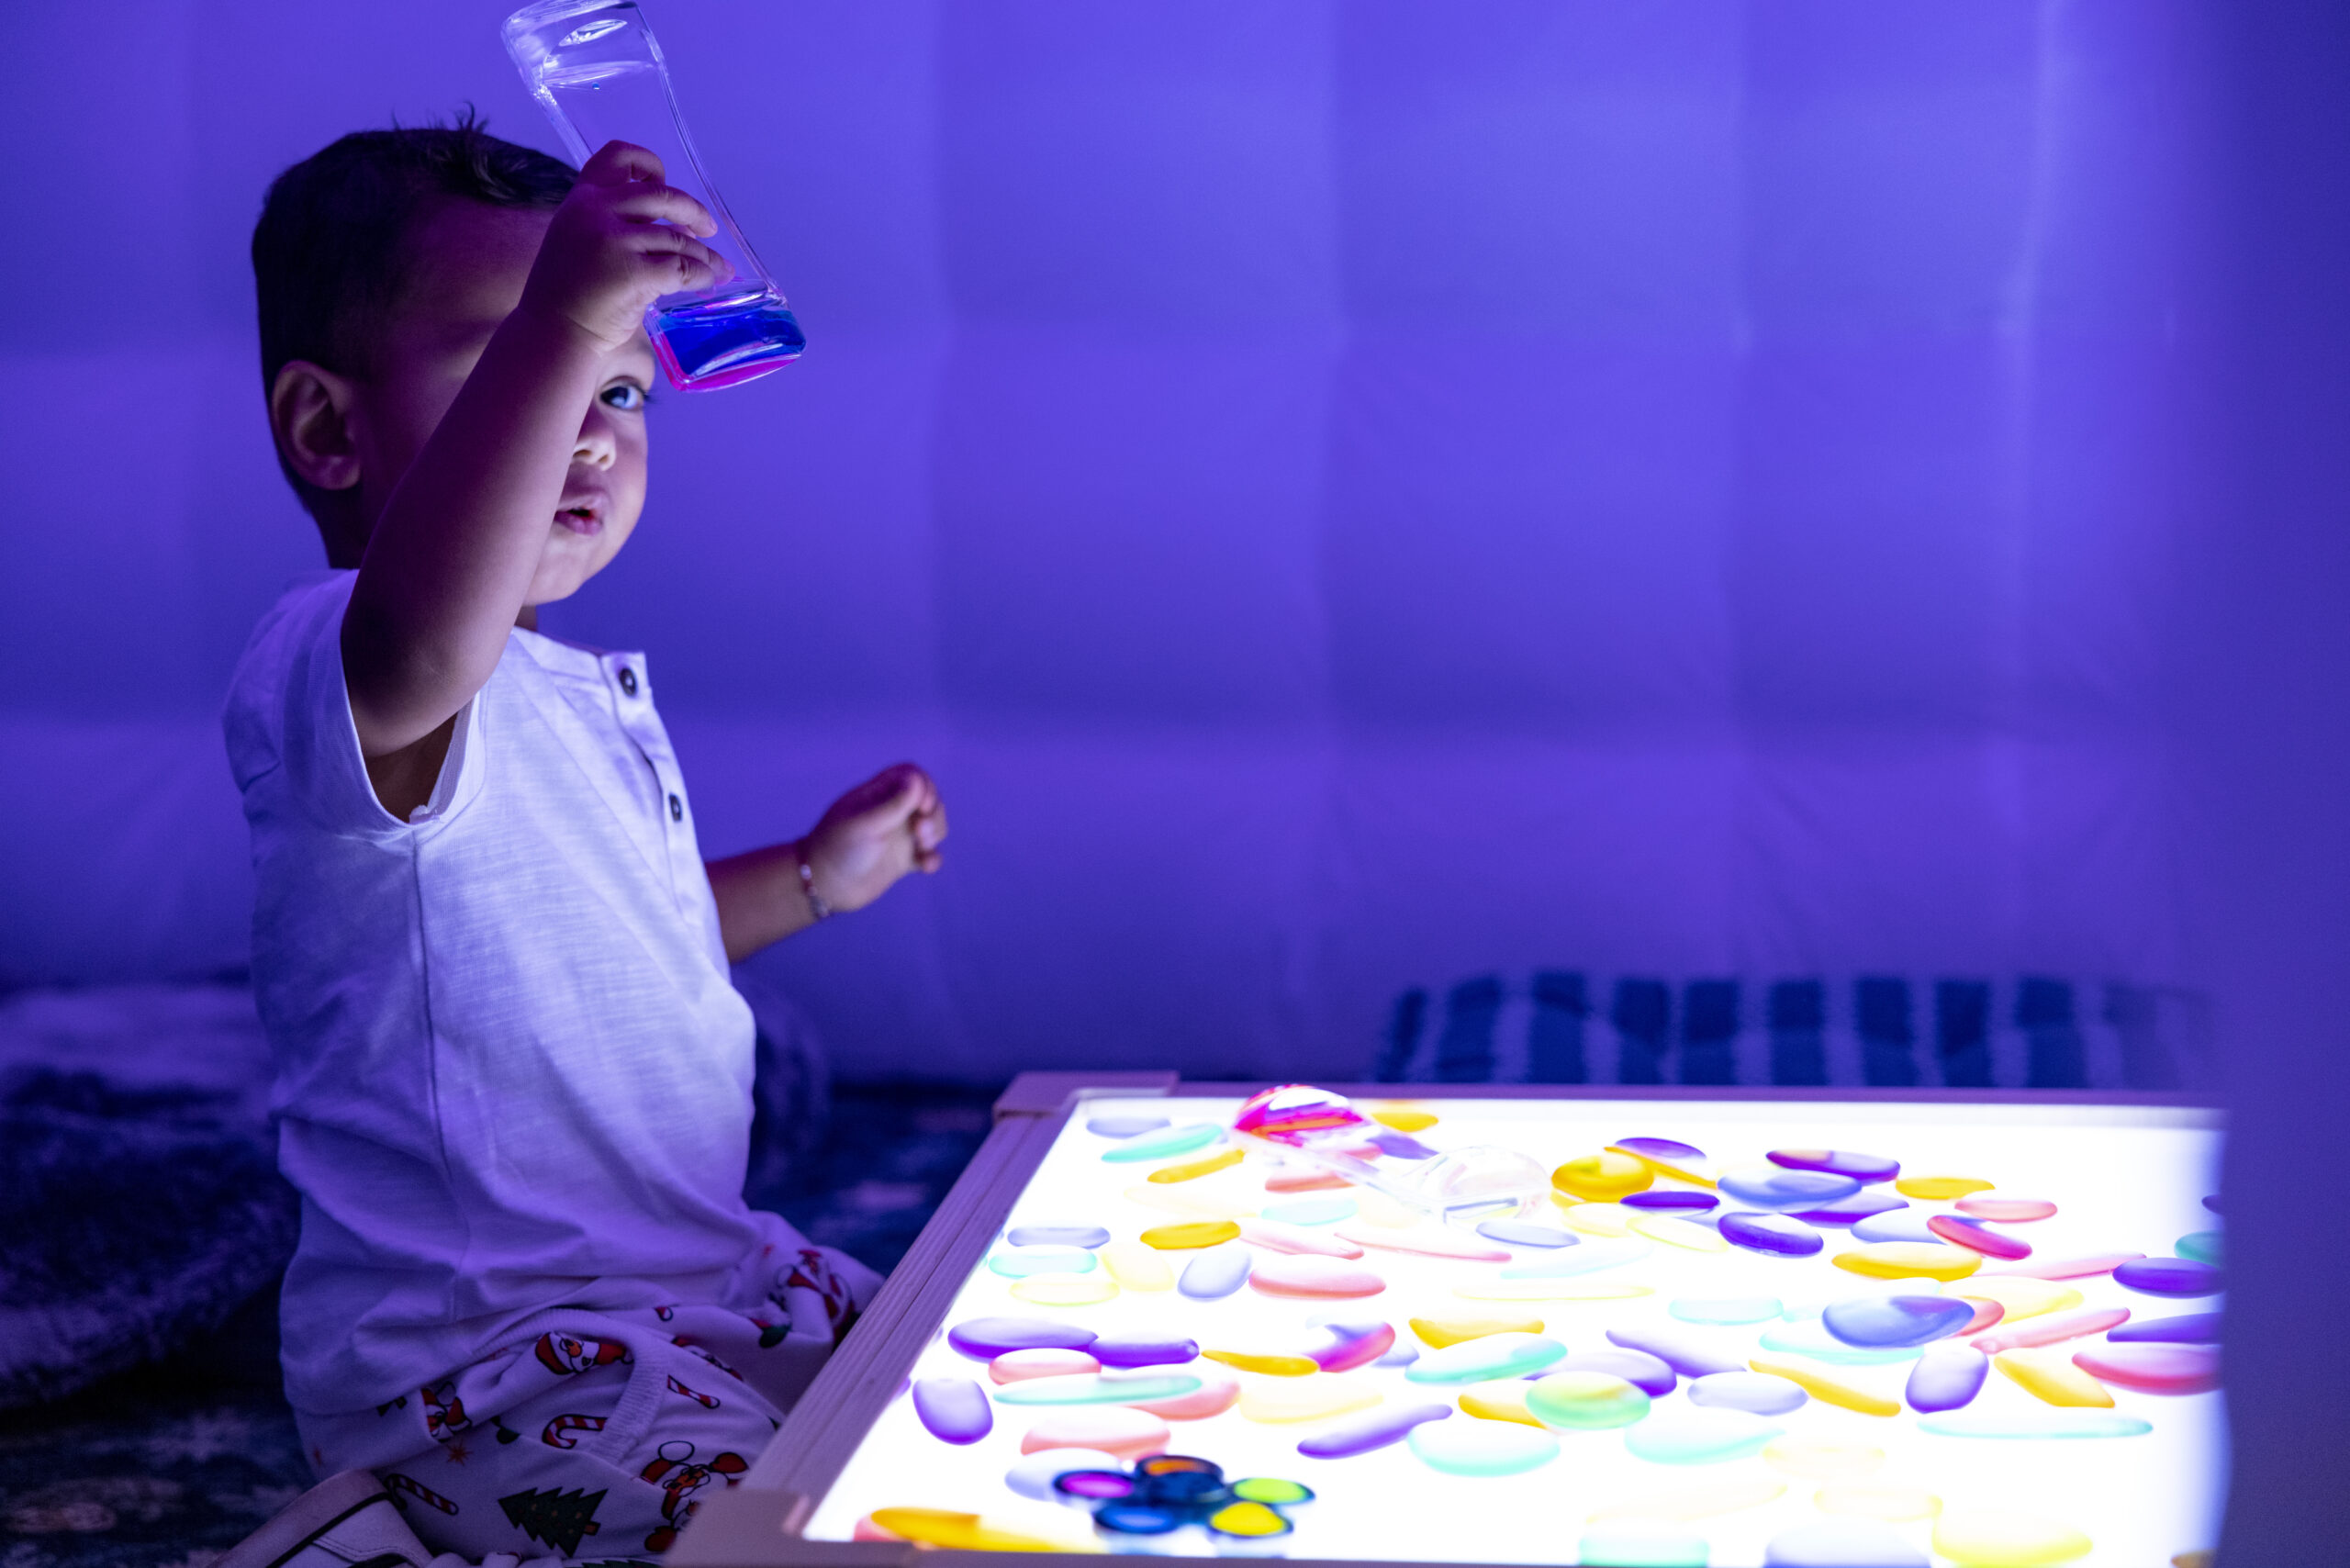 child playing with blocks in a dimly lit room.